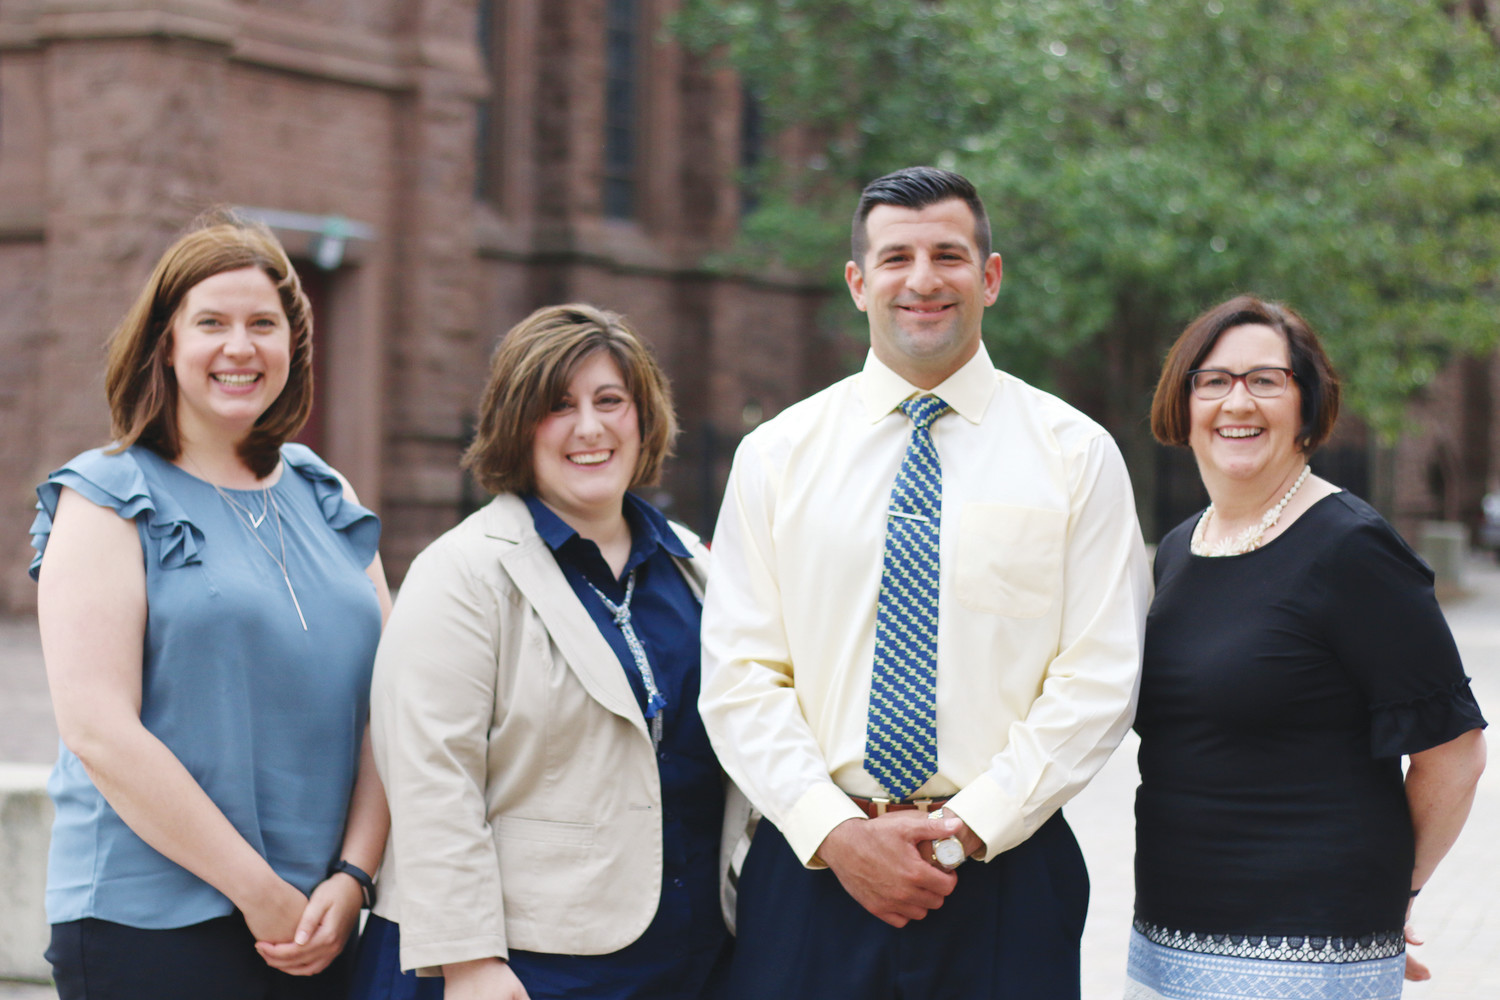 From left, earlier this summer, Jessica Walters, Erin Clark, Mark DeCiccio and Mary-Regina Bennett visit the Catholic School Office for a welcome meeting. Not pictured Maurice (Mo) Guernon and Susan Morrissey. The Diocese of Providence welcomed six new Catholic School principals to begin serving for the 2018-2019 school year.